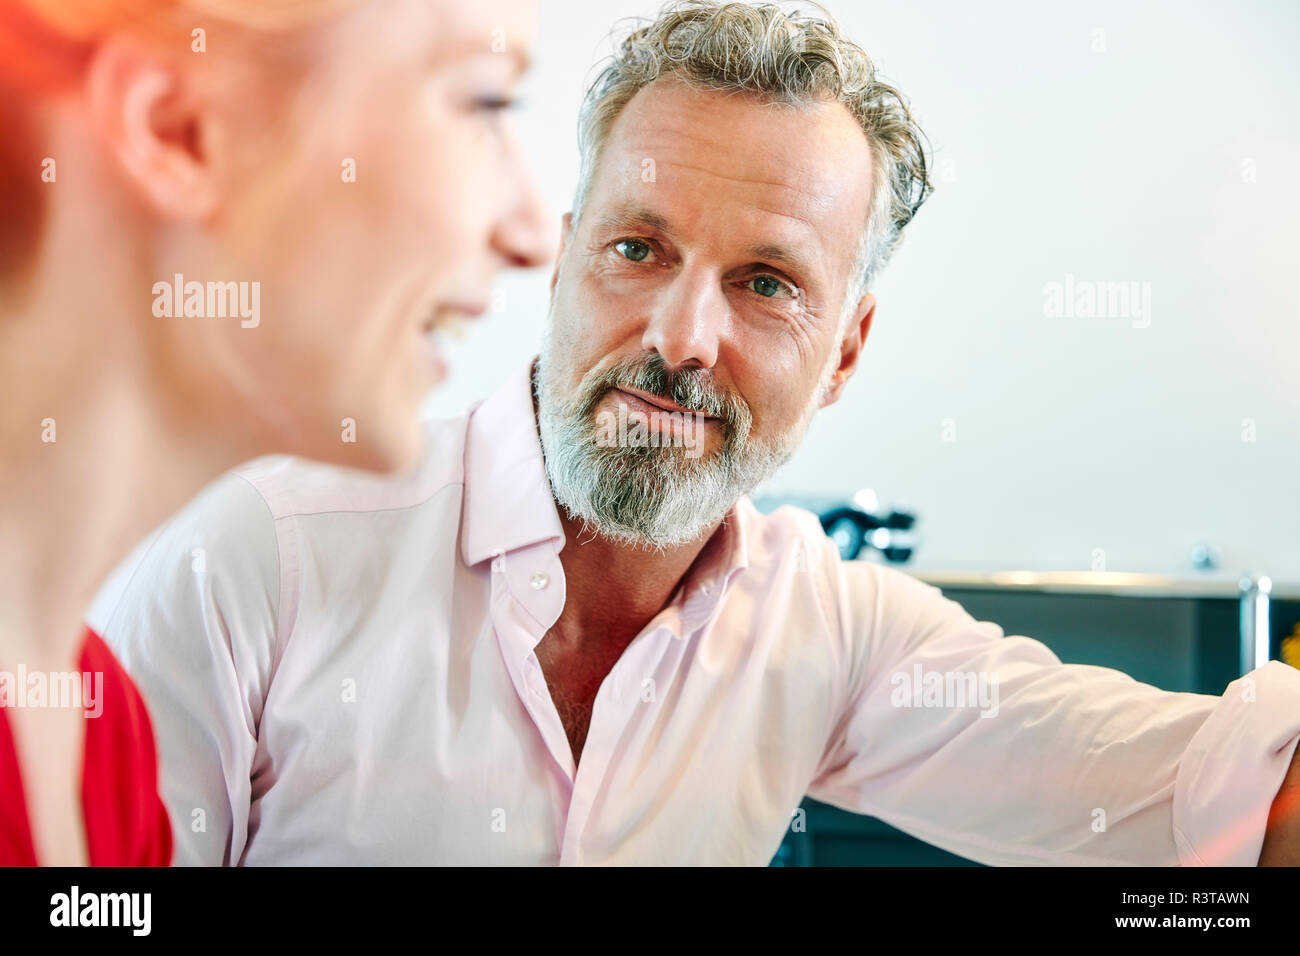 Mature man looking at female colleague in office Stock Photo